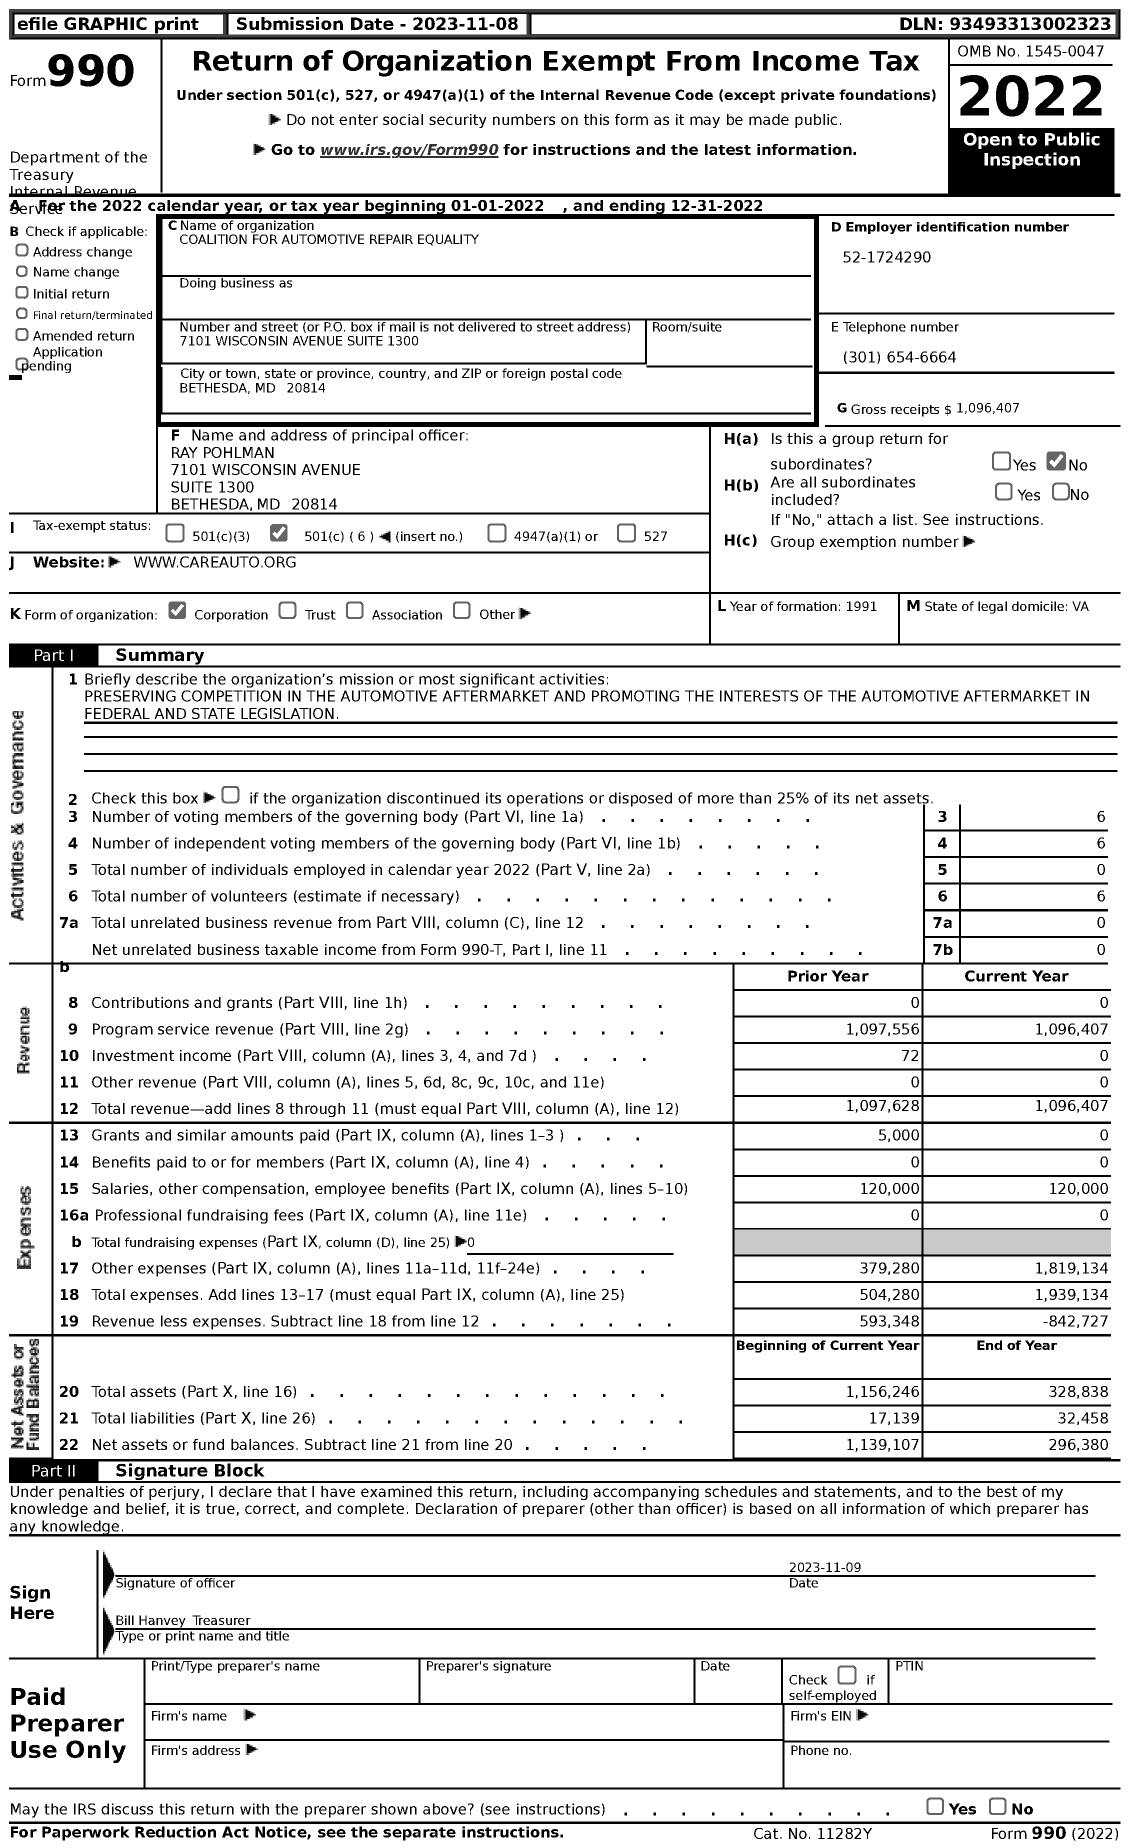 Image of first page of 2022 Form 990 for Coalition for Automotive Repair Equality (CARE)